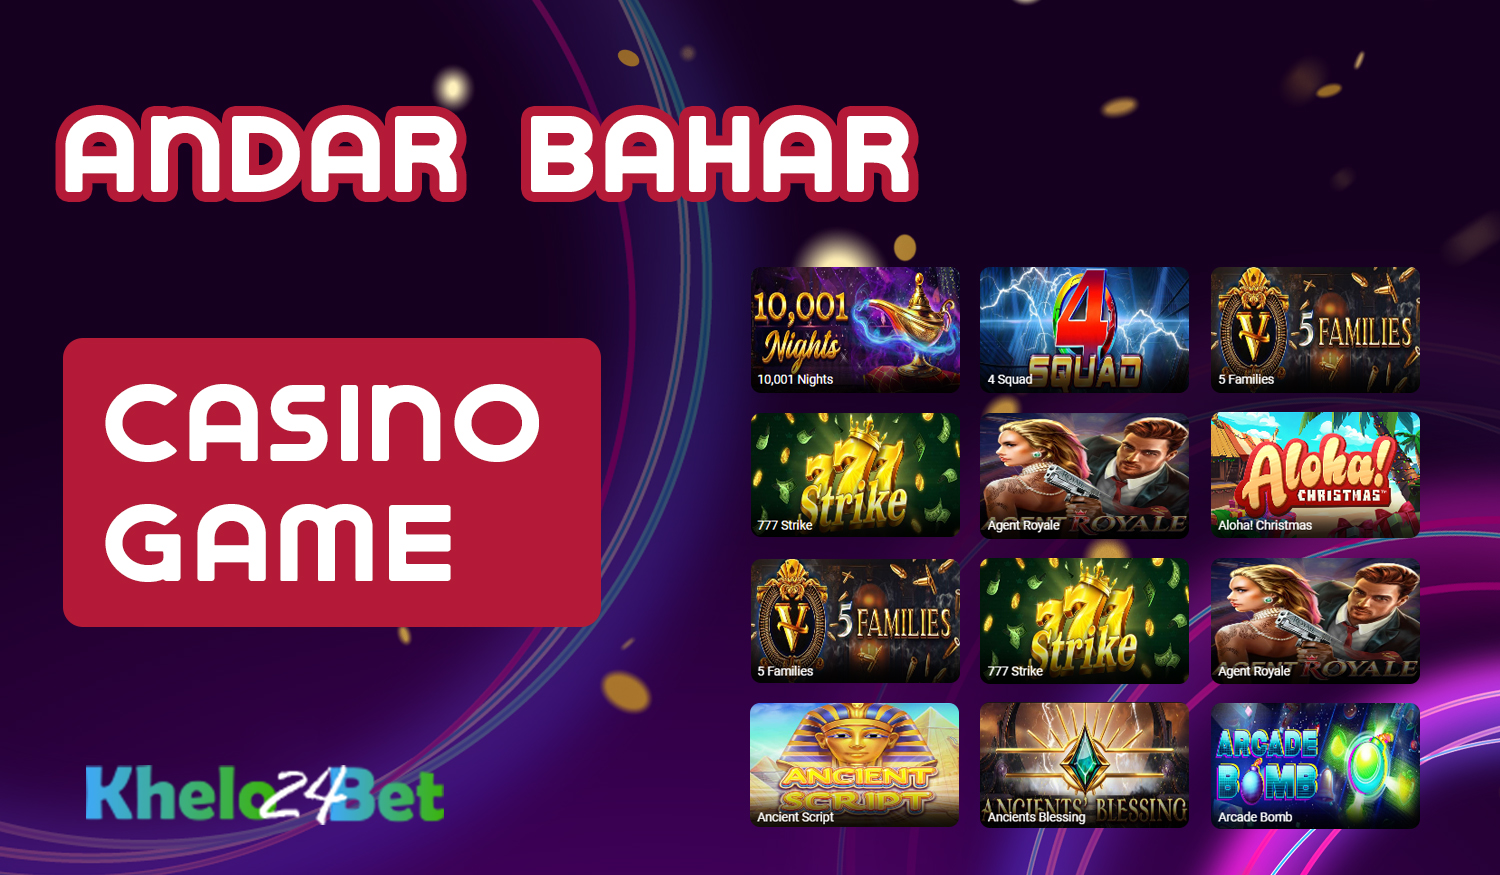 Sections in Khelo24bet online casino section available for Indian users